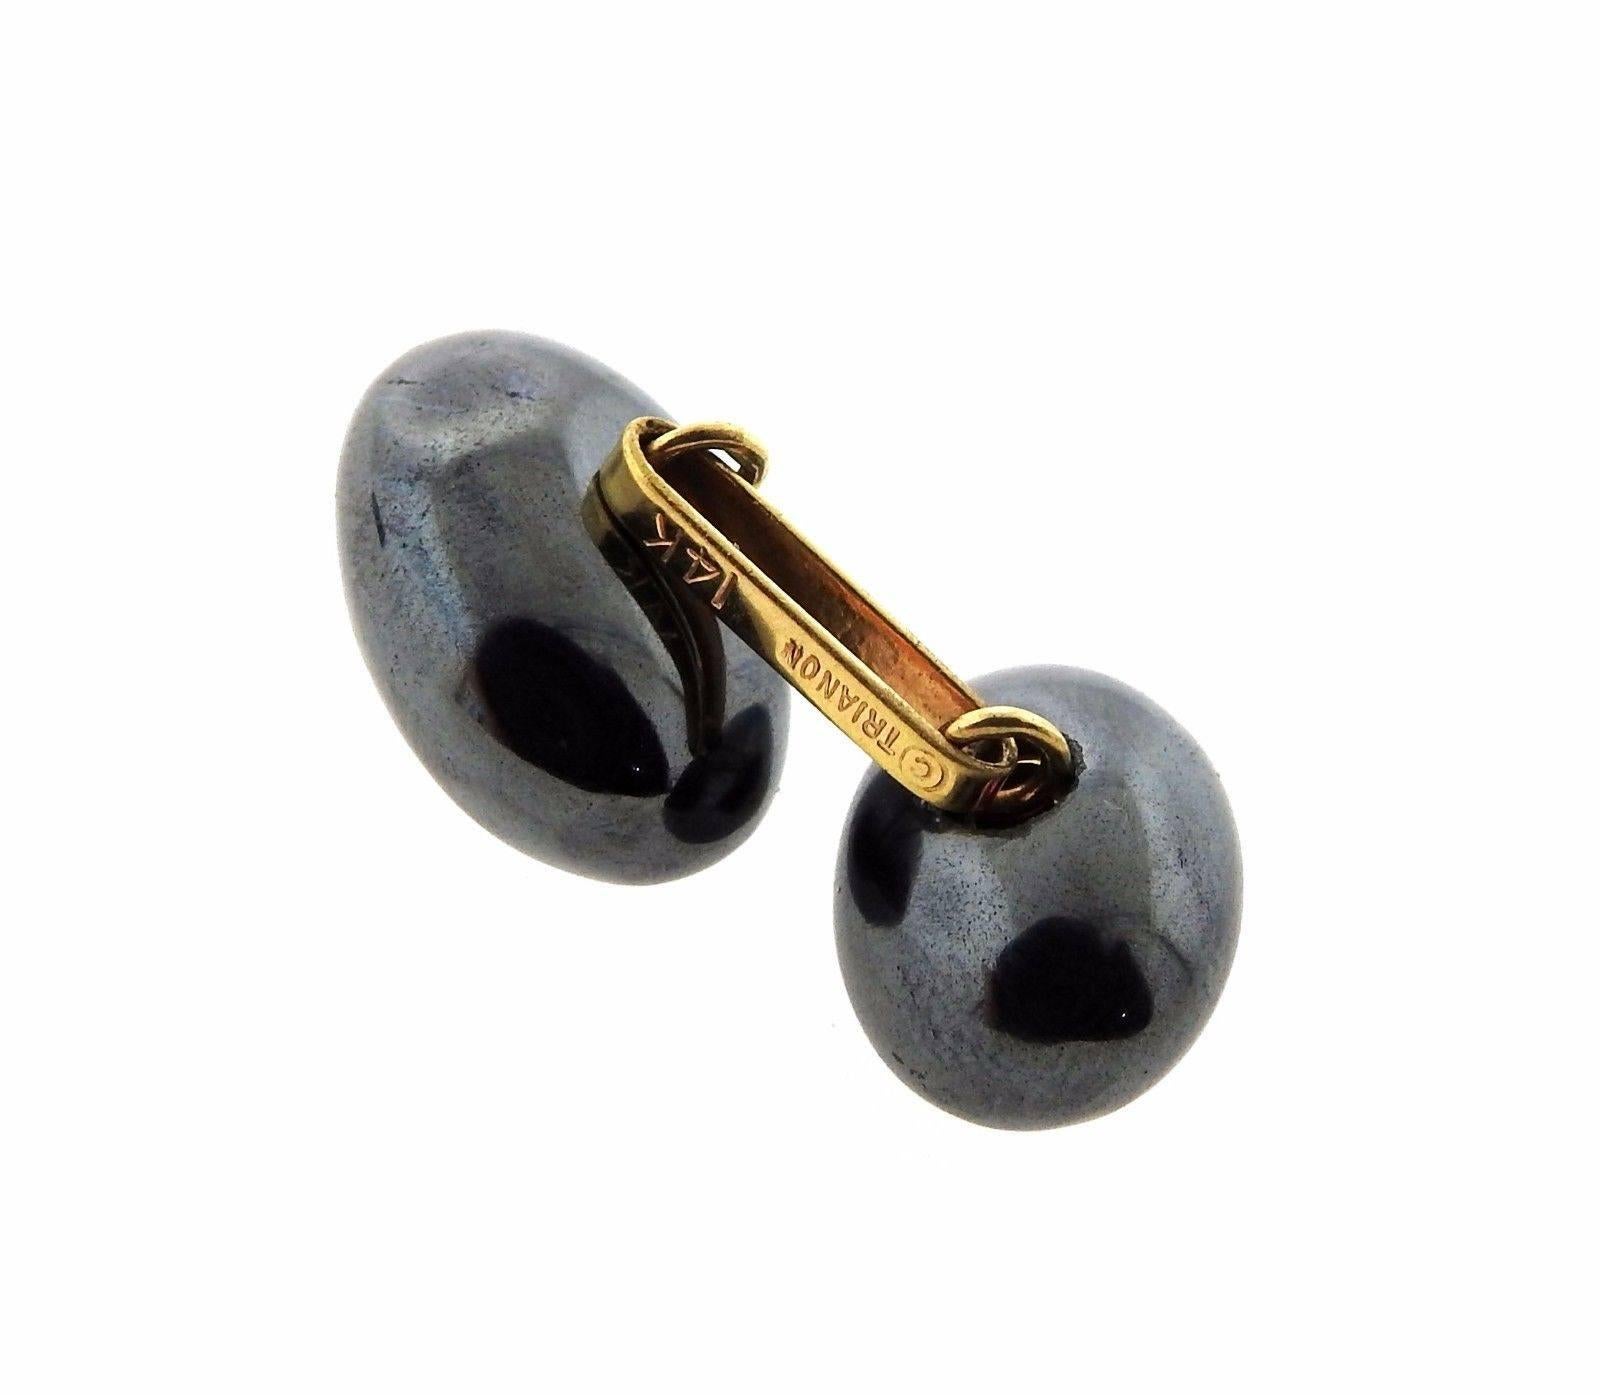 A pair of 14k gold cufflinks set with hematite and approximately 0.06ctw of G/VS diamonds. The cufflink tops measure 16mm x 12mm, backs measure 14mm x 10mm.  The weight of the cufflinks is 16.1 grams.
